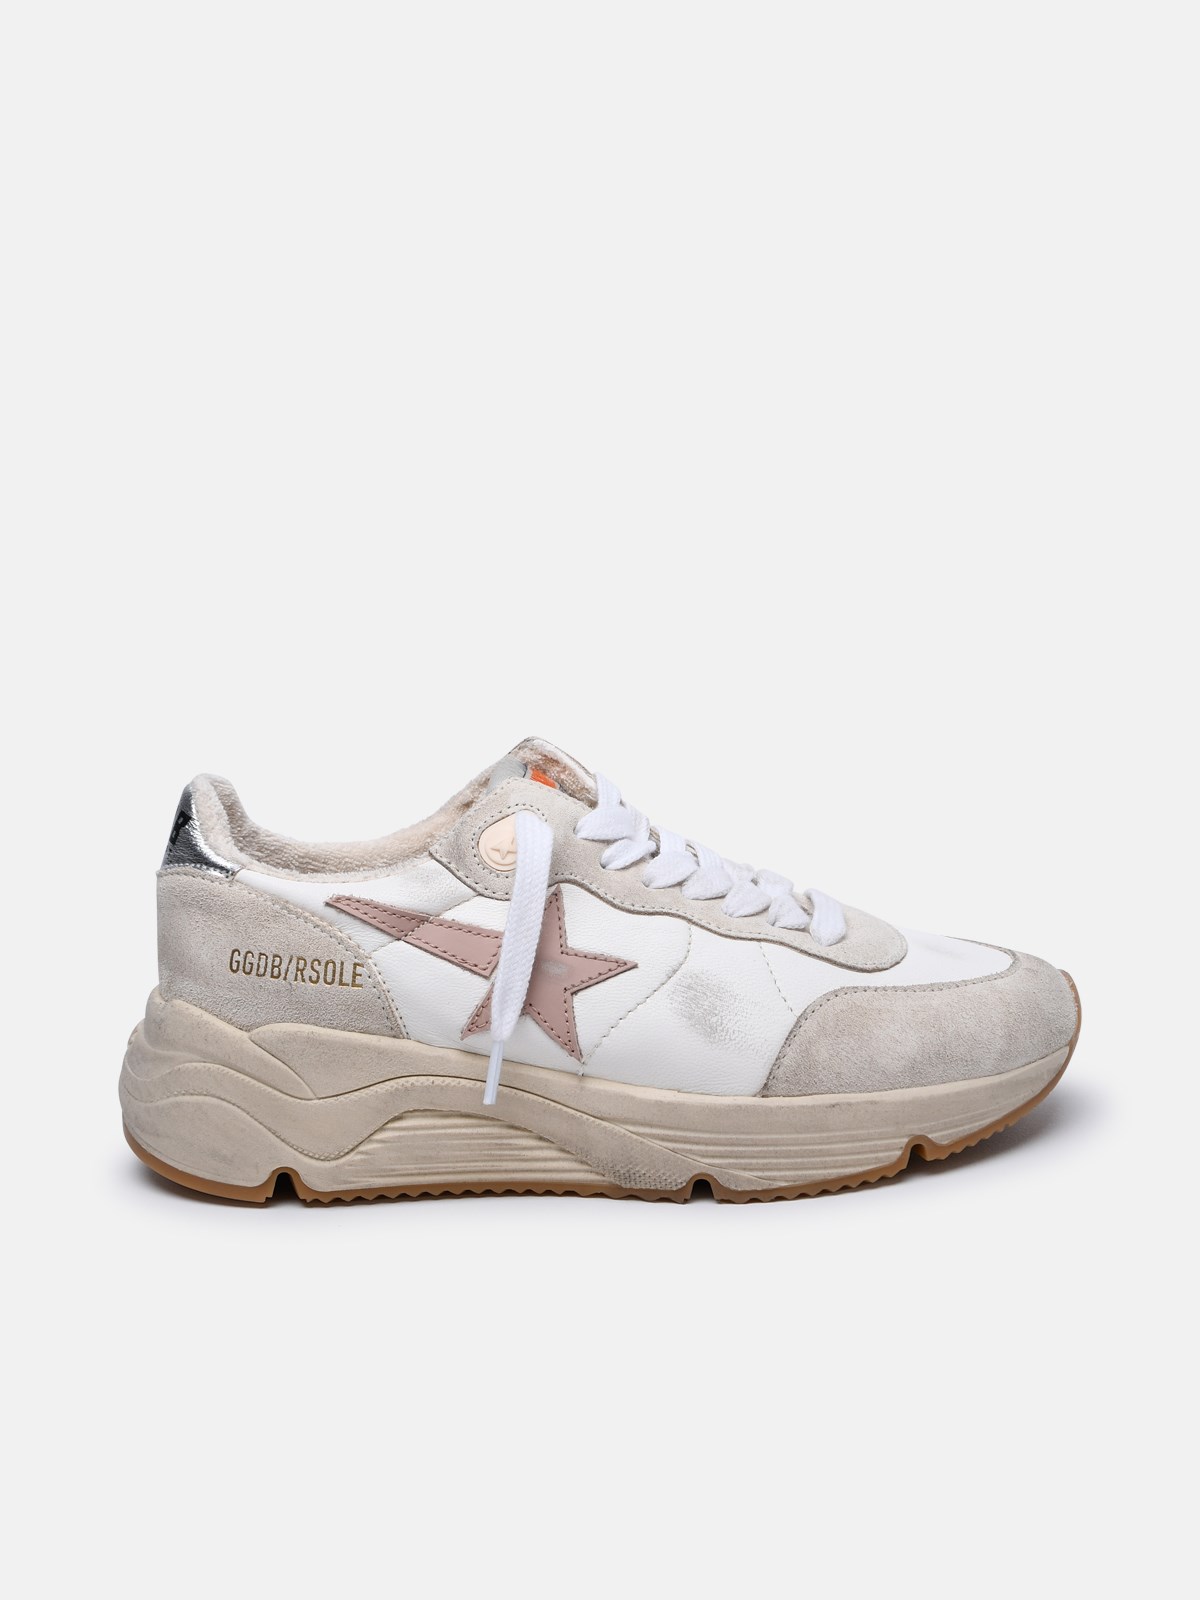 Golden Goose 'running Sole' White Nappa Leather Sneakers